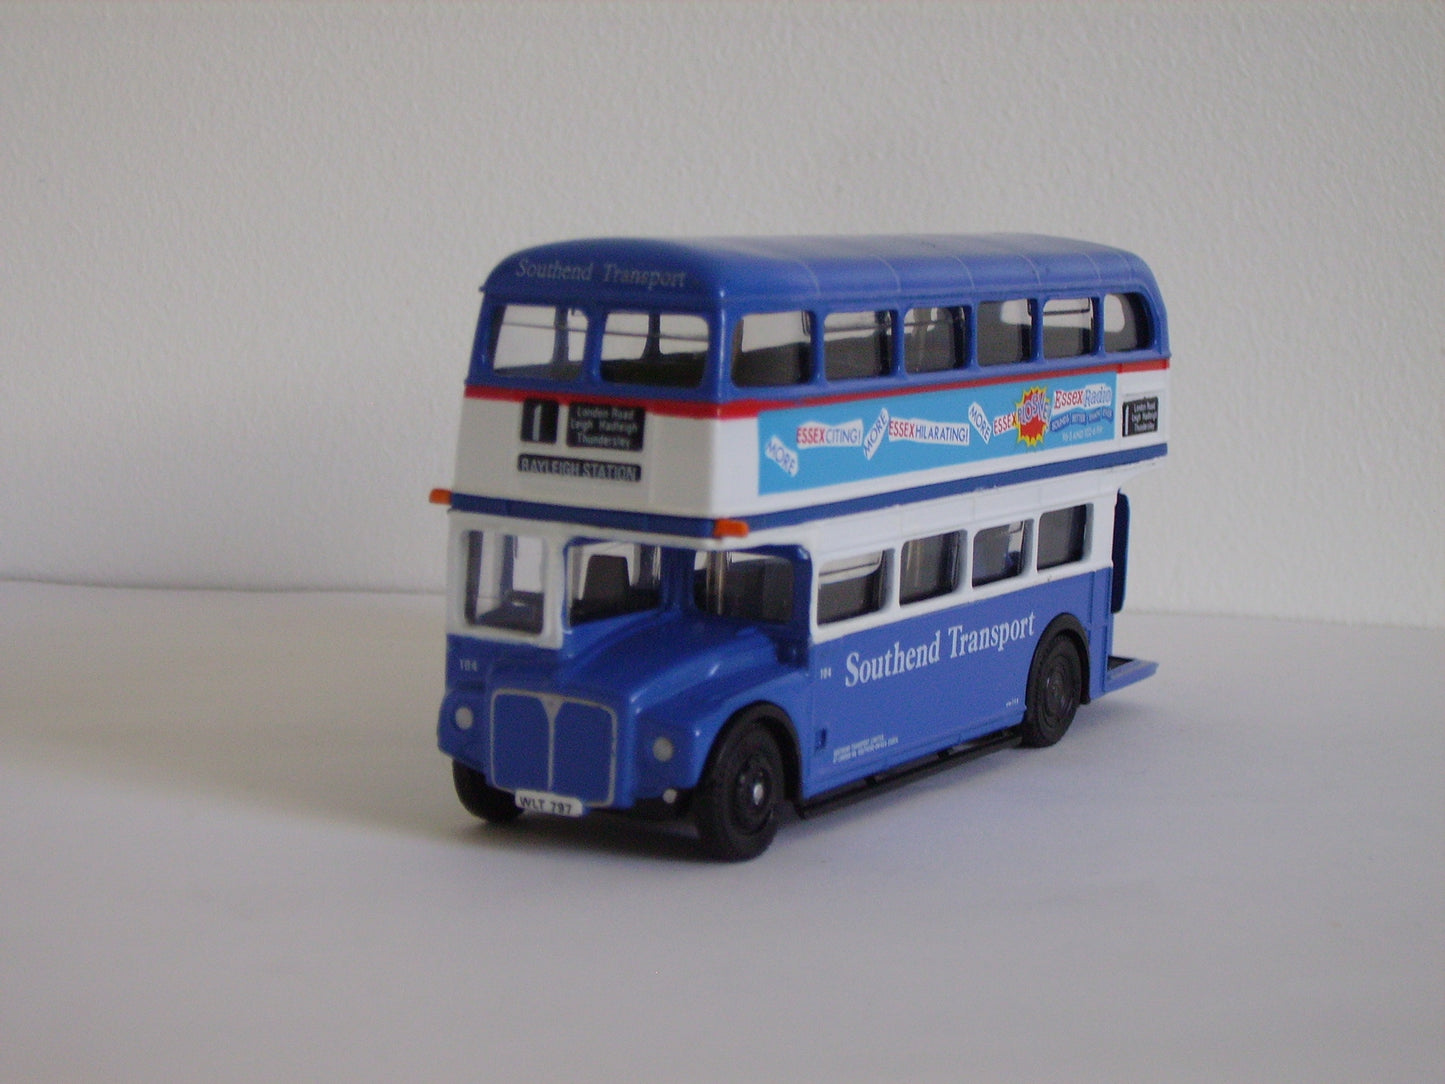 15604DL Routemaster "Southend Transport"